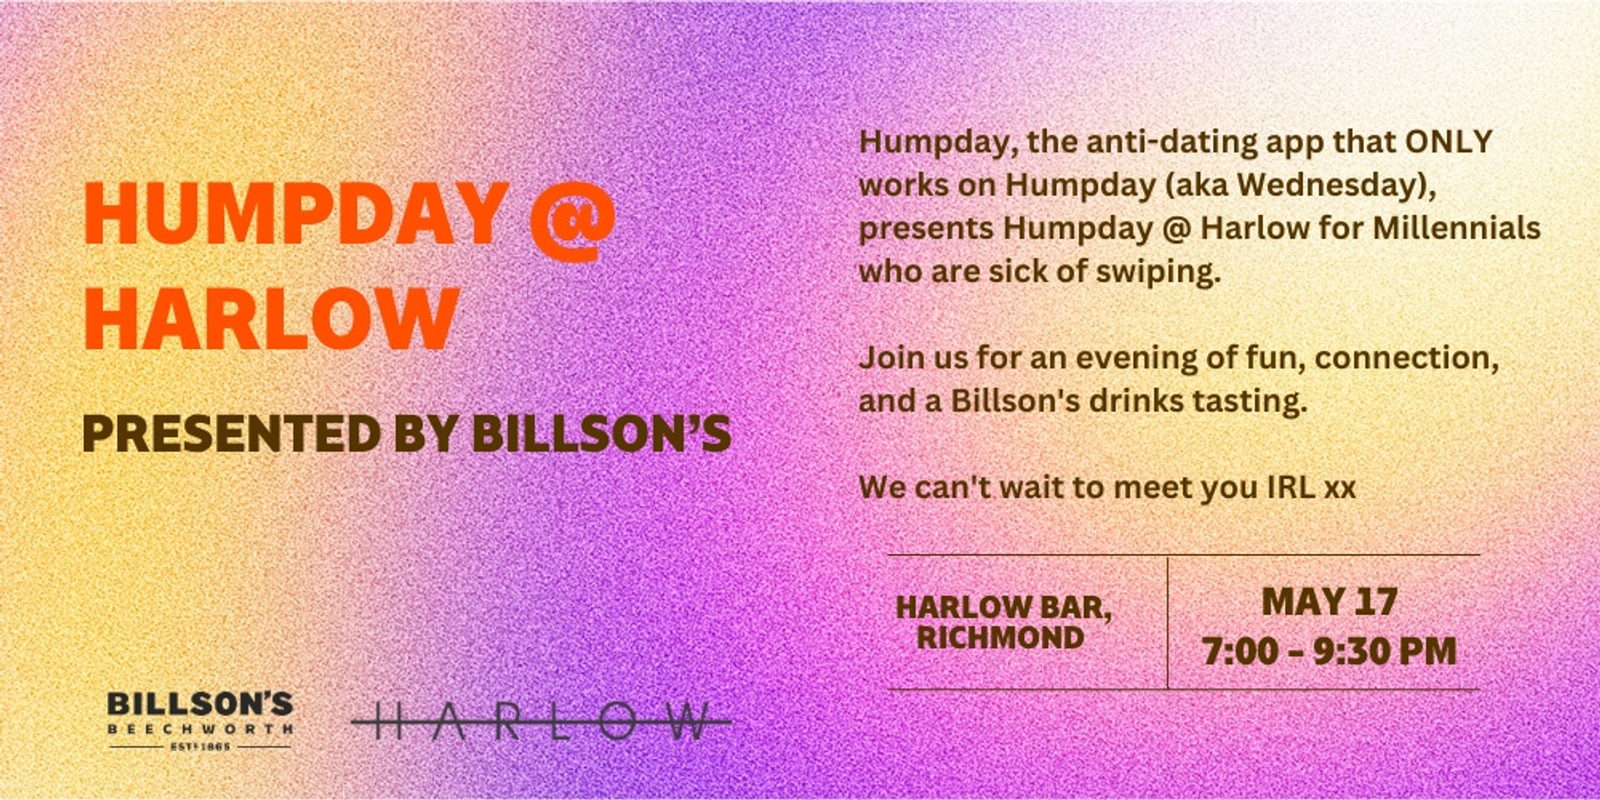 Banner image for Humpday @ Harlow presented by Billson’s 